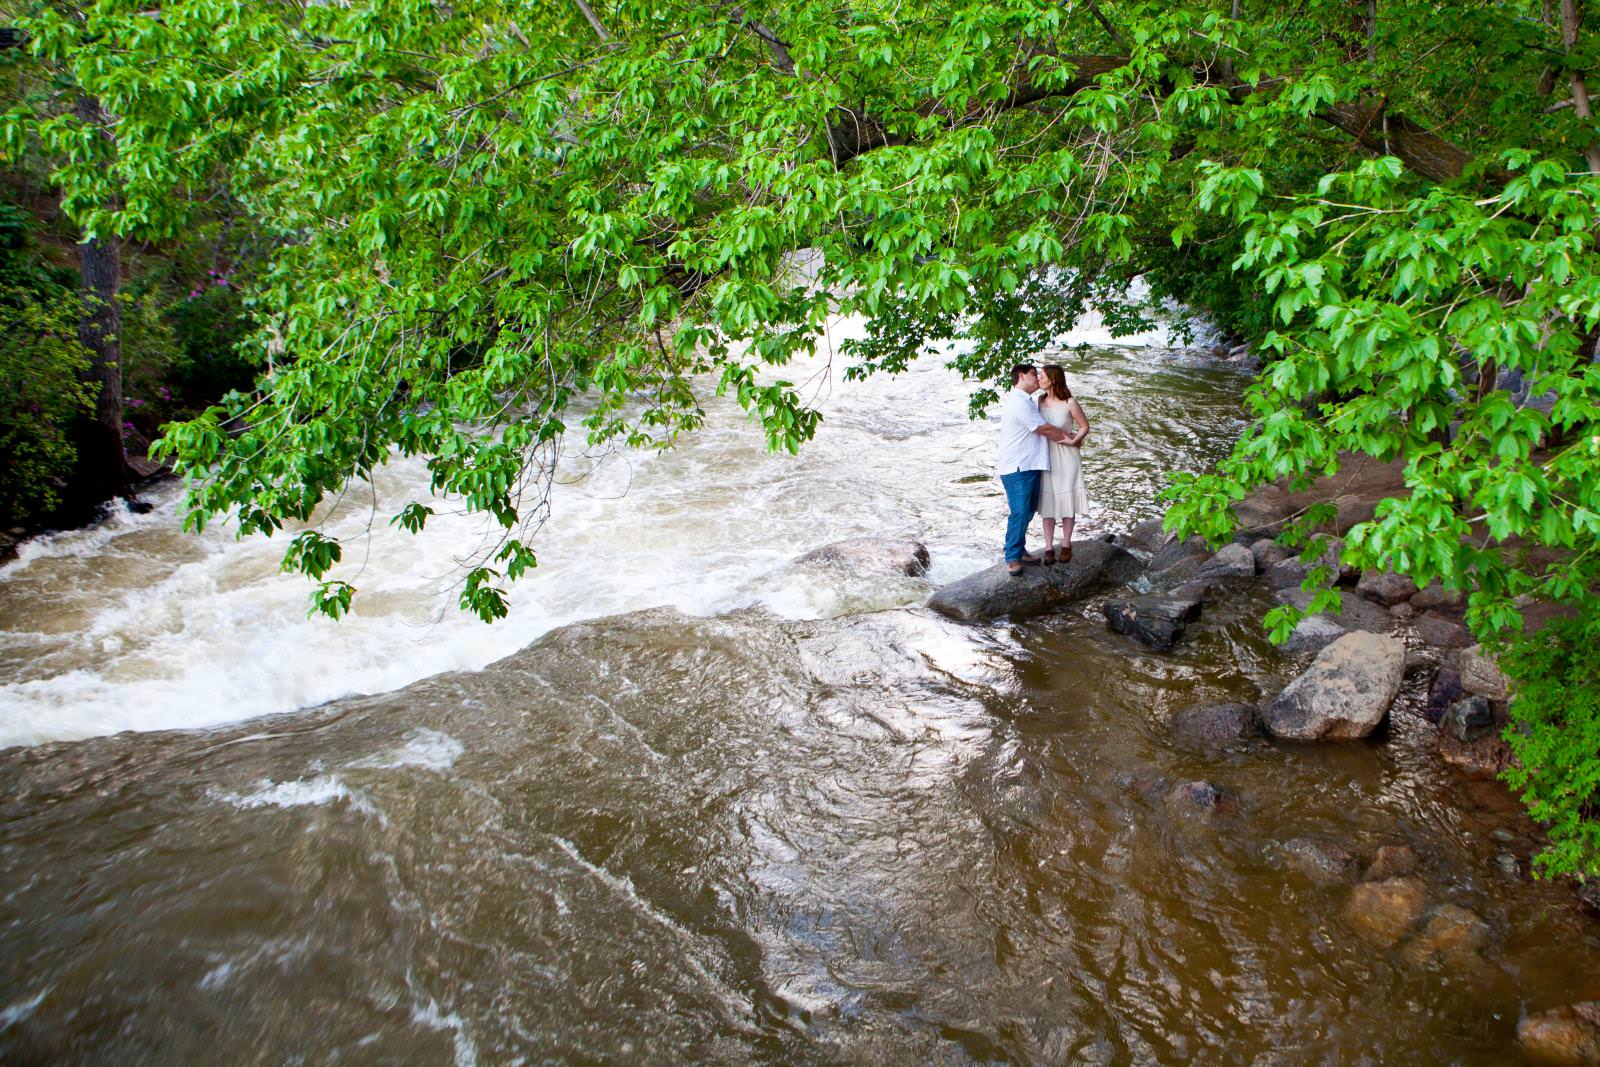 An engaged couple pose along the Boulder Creek.